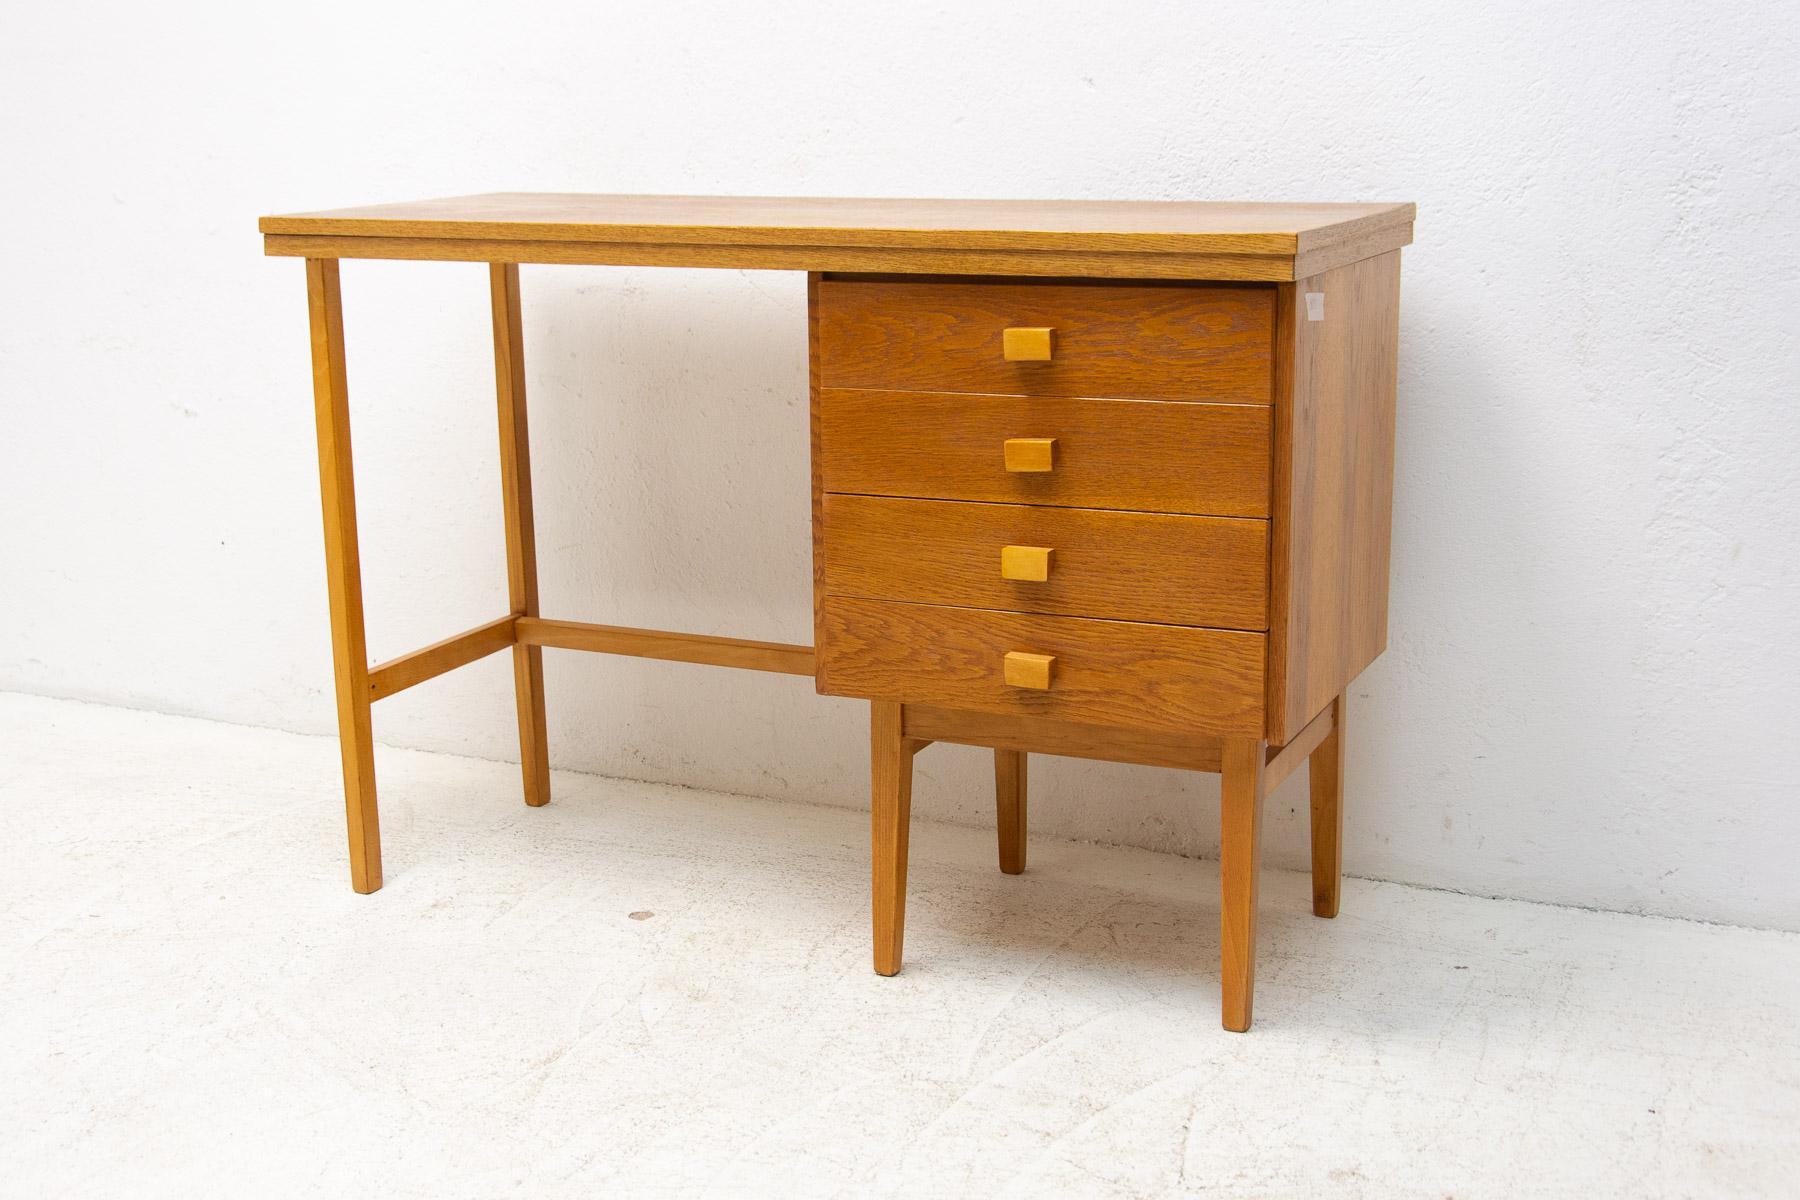 A Simple beech wood writing desk from the HIKOR Písek company, 1980´s, Czechoslovakia
The design is very simple and elegant. It features a section with 4 drawers. The surface of this desk has been fully restored and is in very good